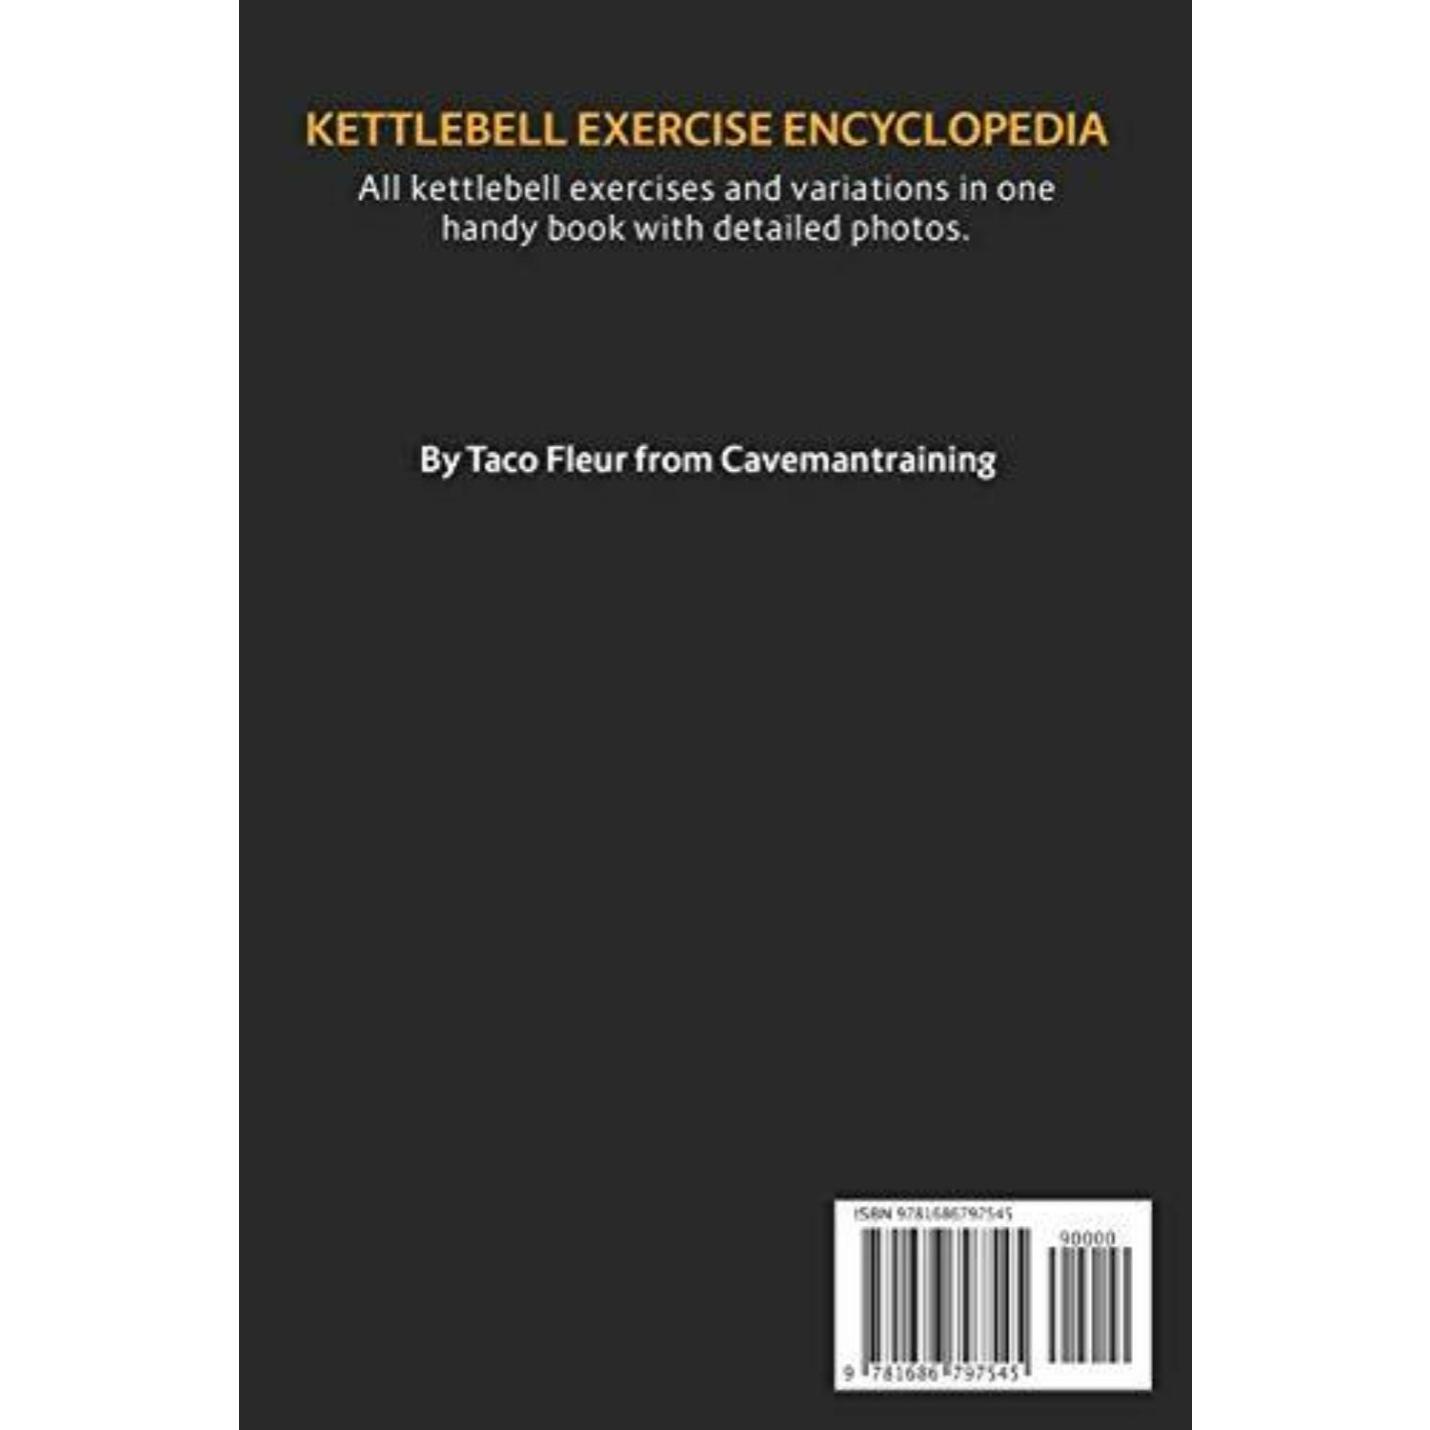 Kettlebell Exercise Encyclopedia VOL. 5: Kettlebell combos, isolation, and multi-planar exercise variations - kettlebell oefeningen - happygetfit.com